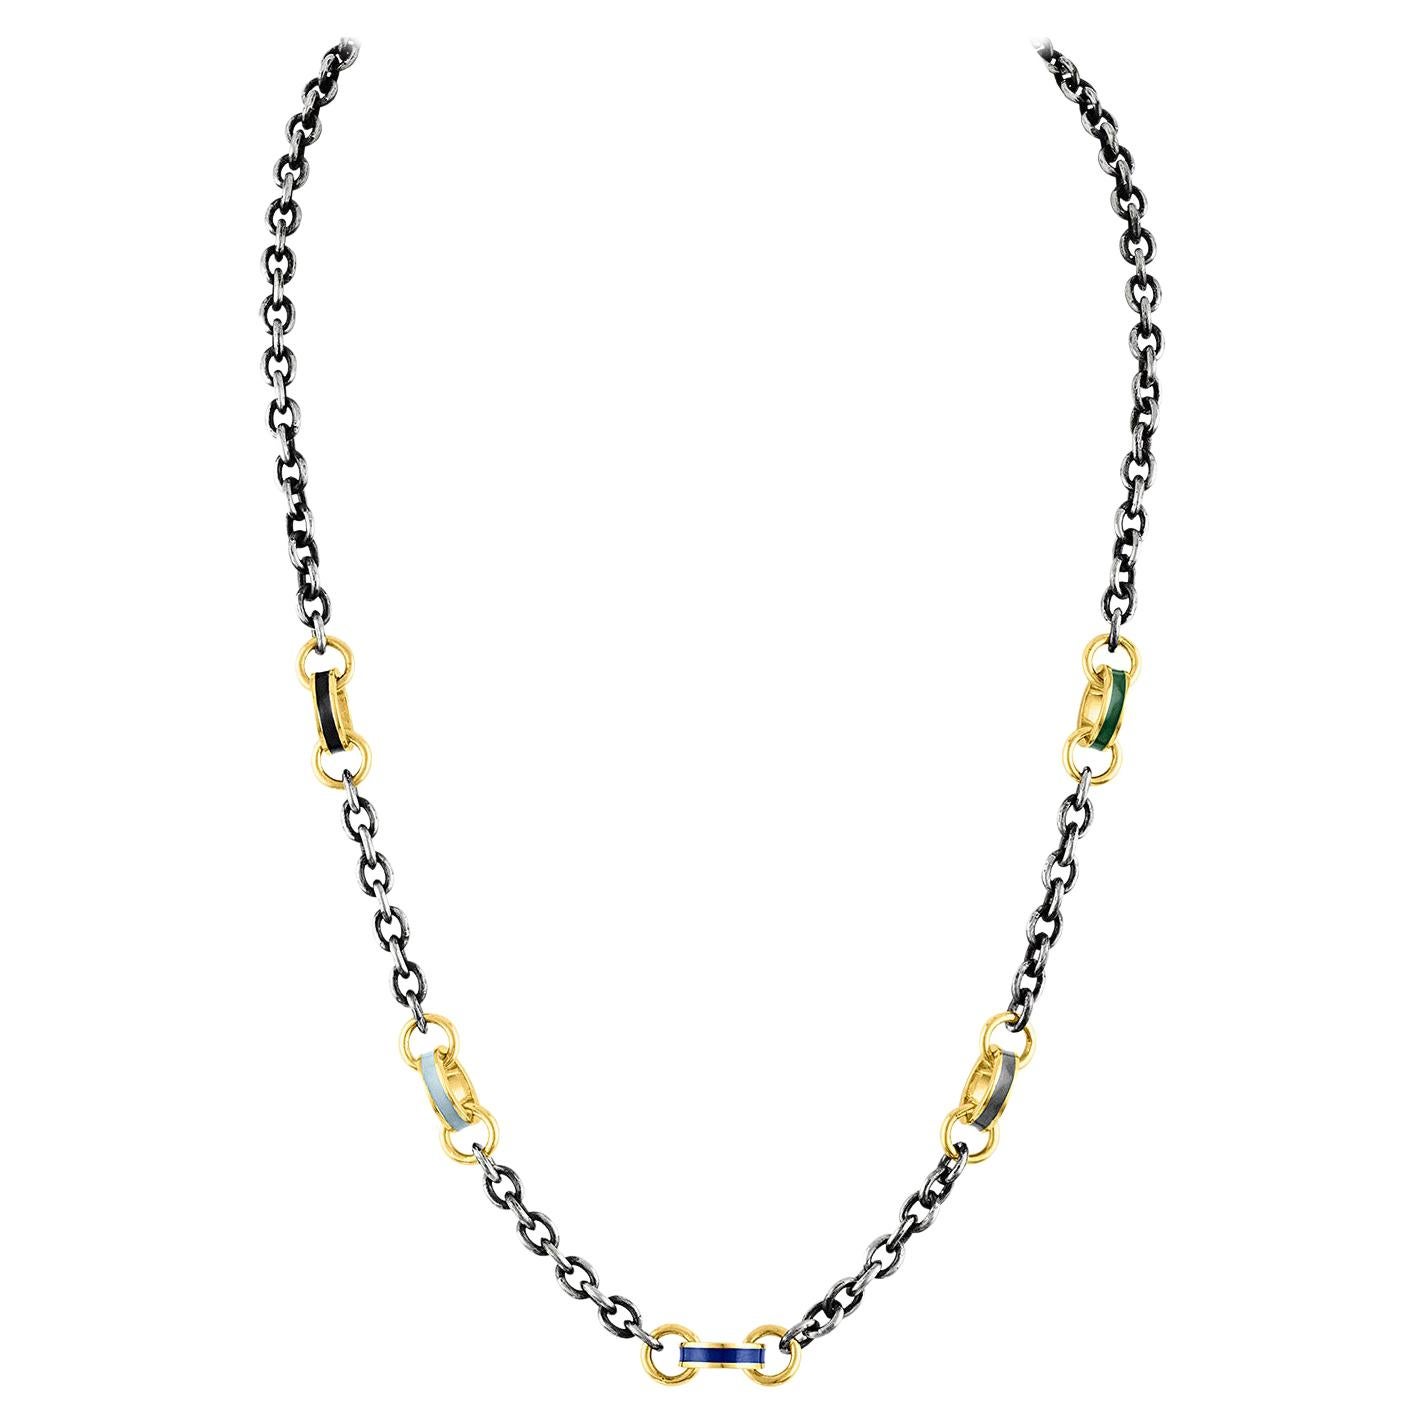 14 Karat and Oxidized Silver Chain with Gold and Enamel Links For Sale